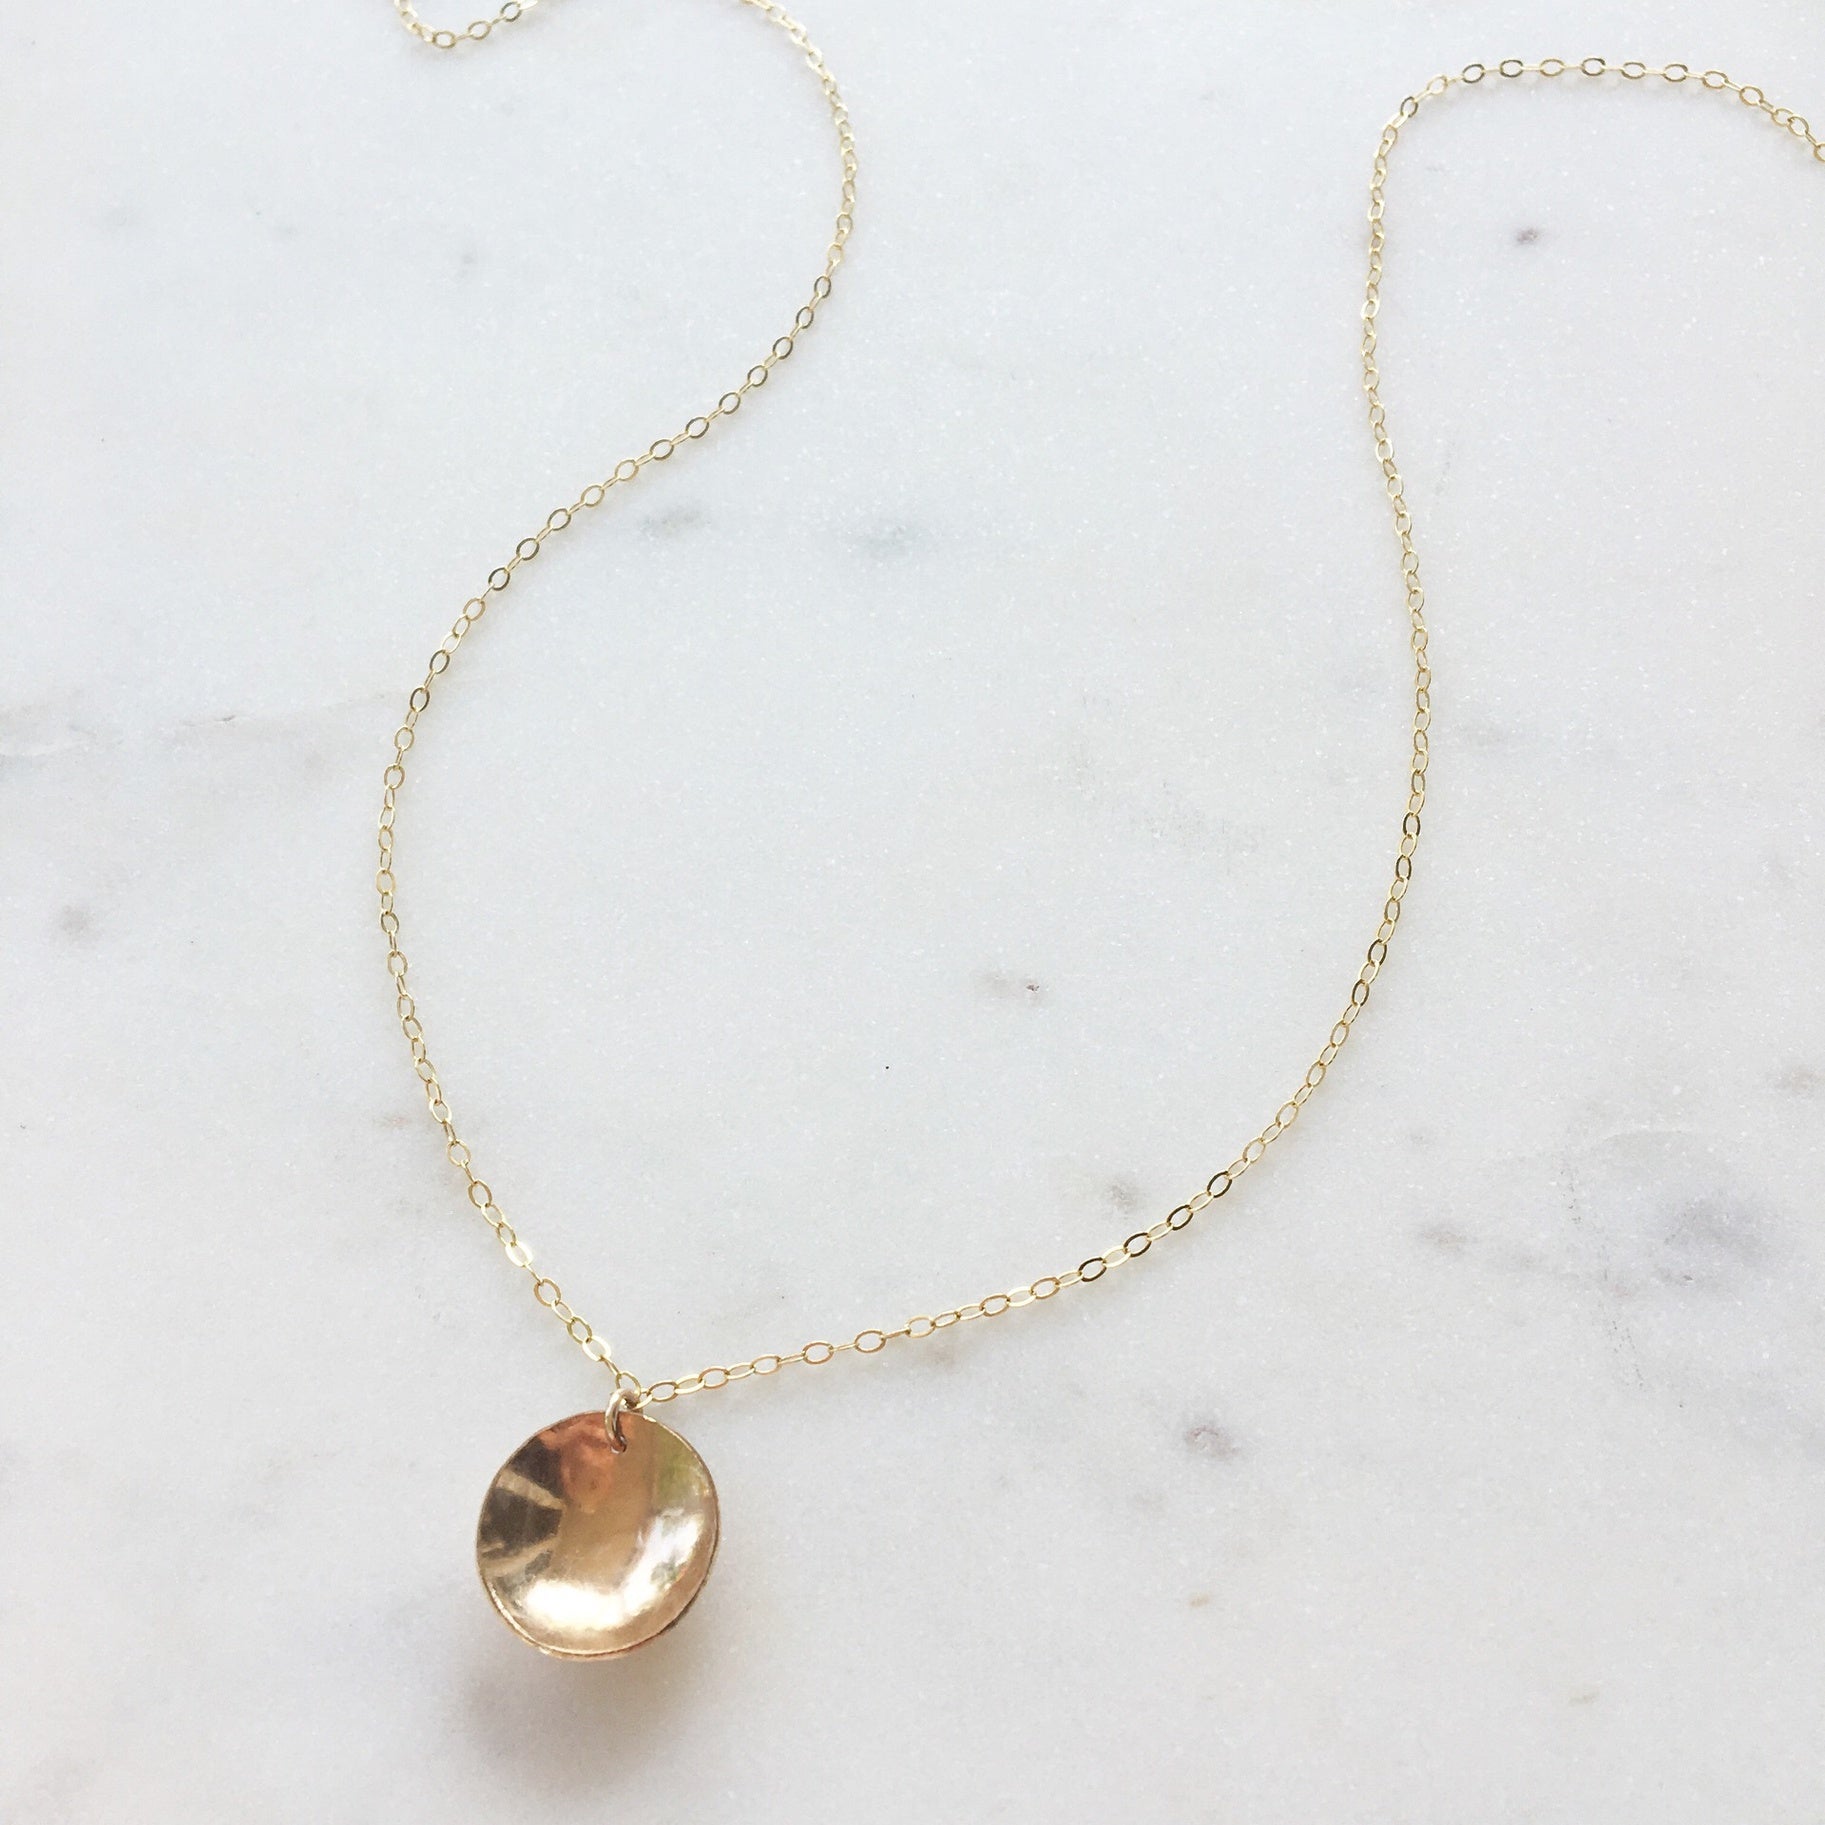 The Cove Necklace by Token Jewelry